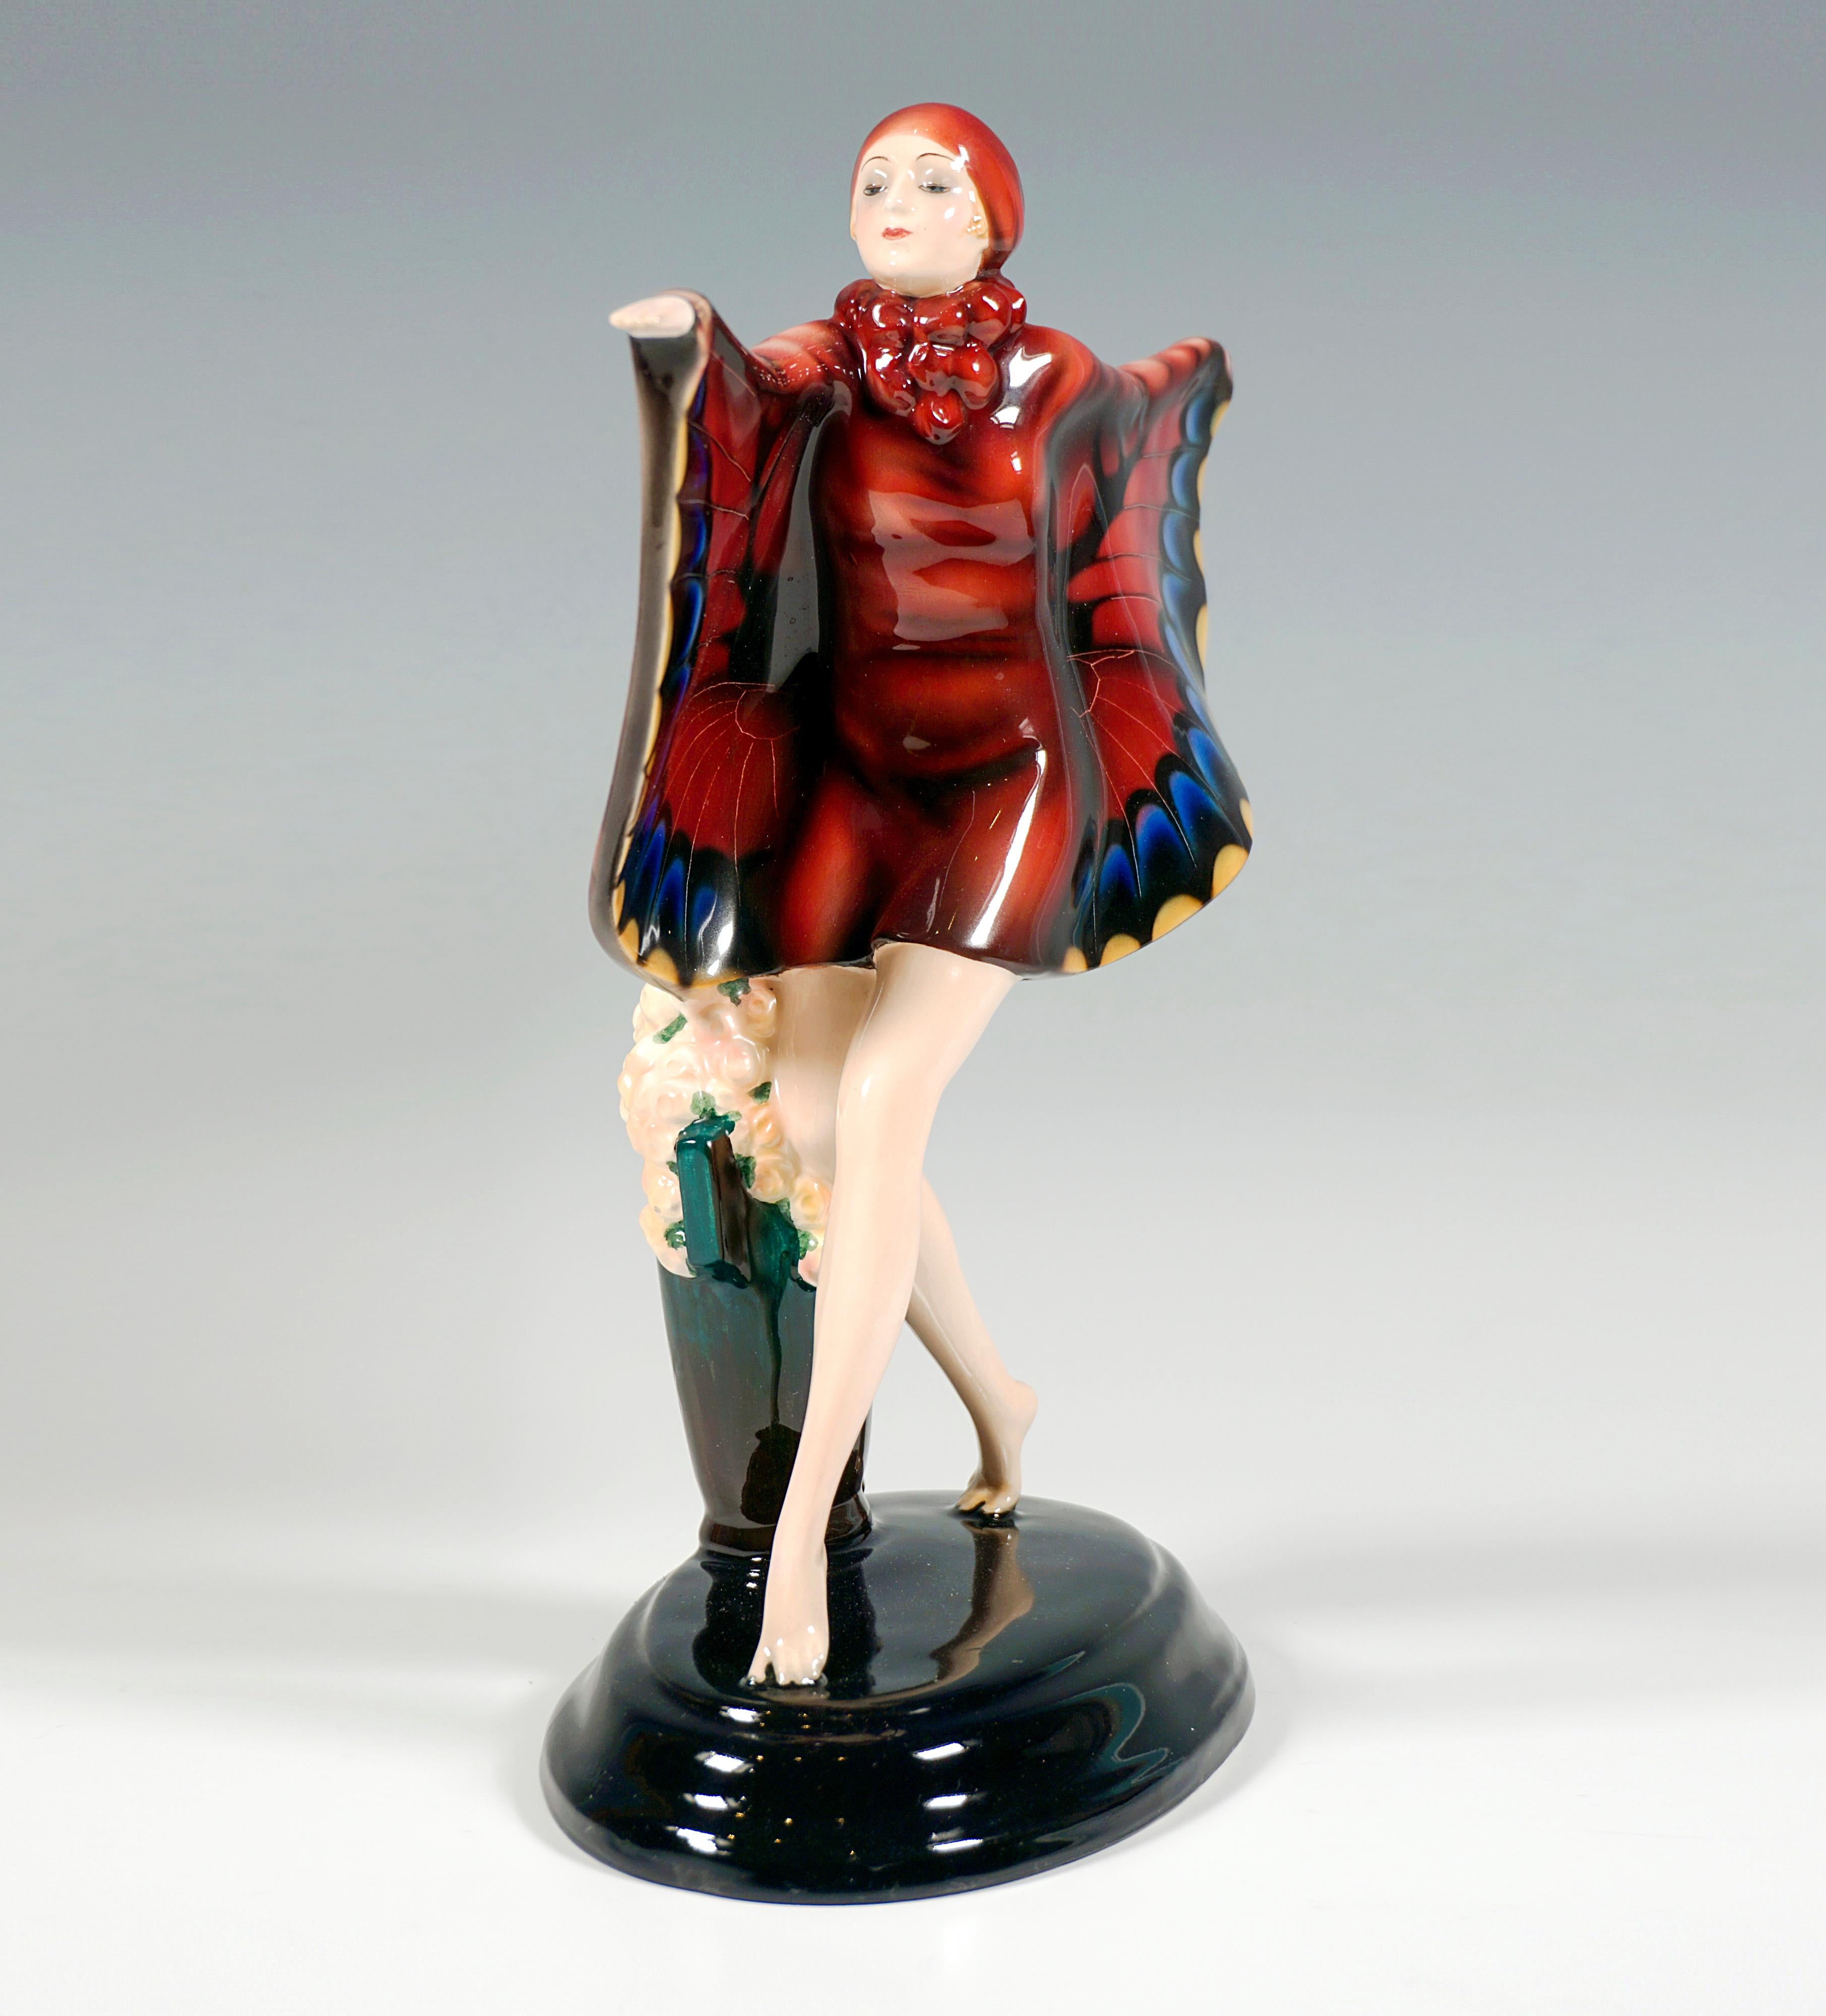 One of the most famous and elegant models from the Goldscheider manufacture:
The dance 'Der Gefangene Vogel' performed by the dancer Niddy Impekoven (1904-2002) in the early twenties of the 20th century is shown: the dancer, balancing on tiptoe,